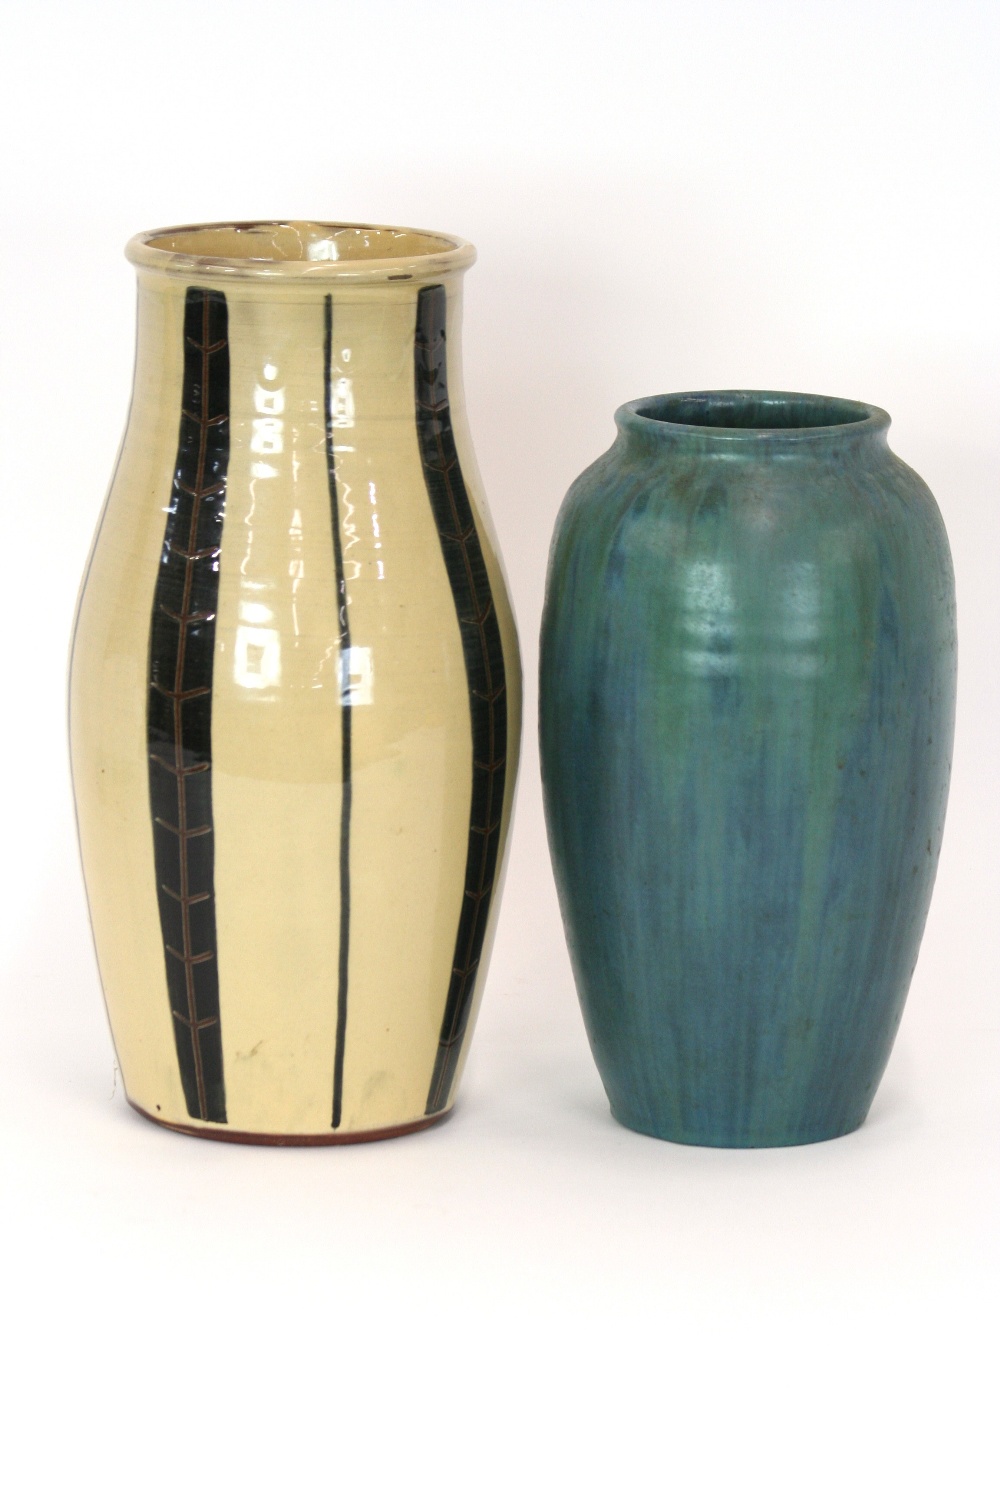 A Studio Pottery vase, decorated with running green and blue glaze, 26.